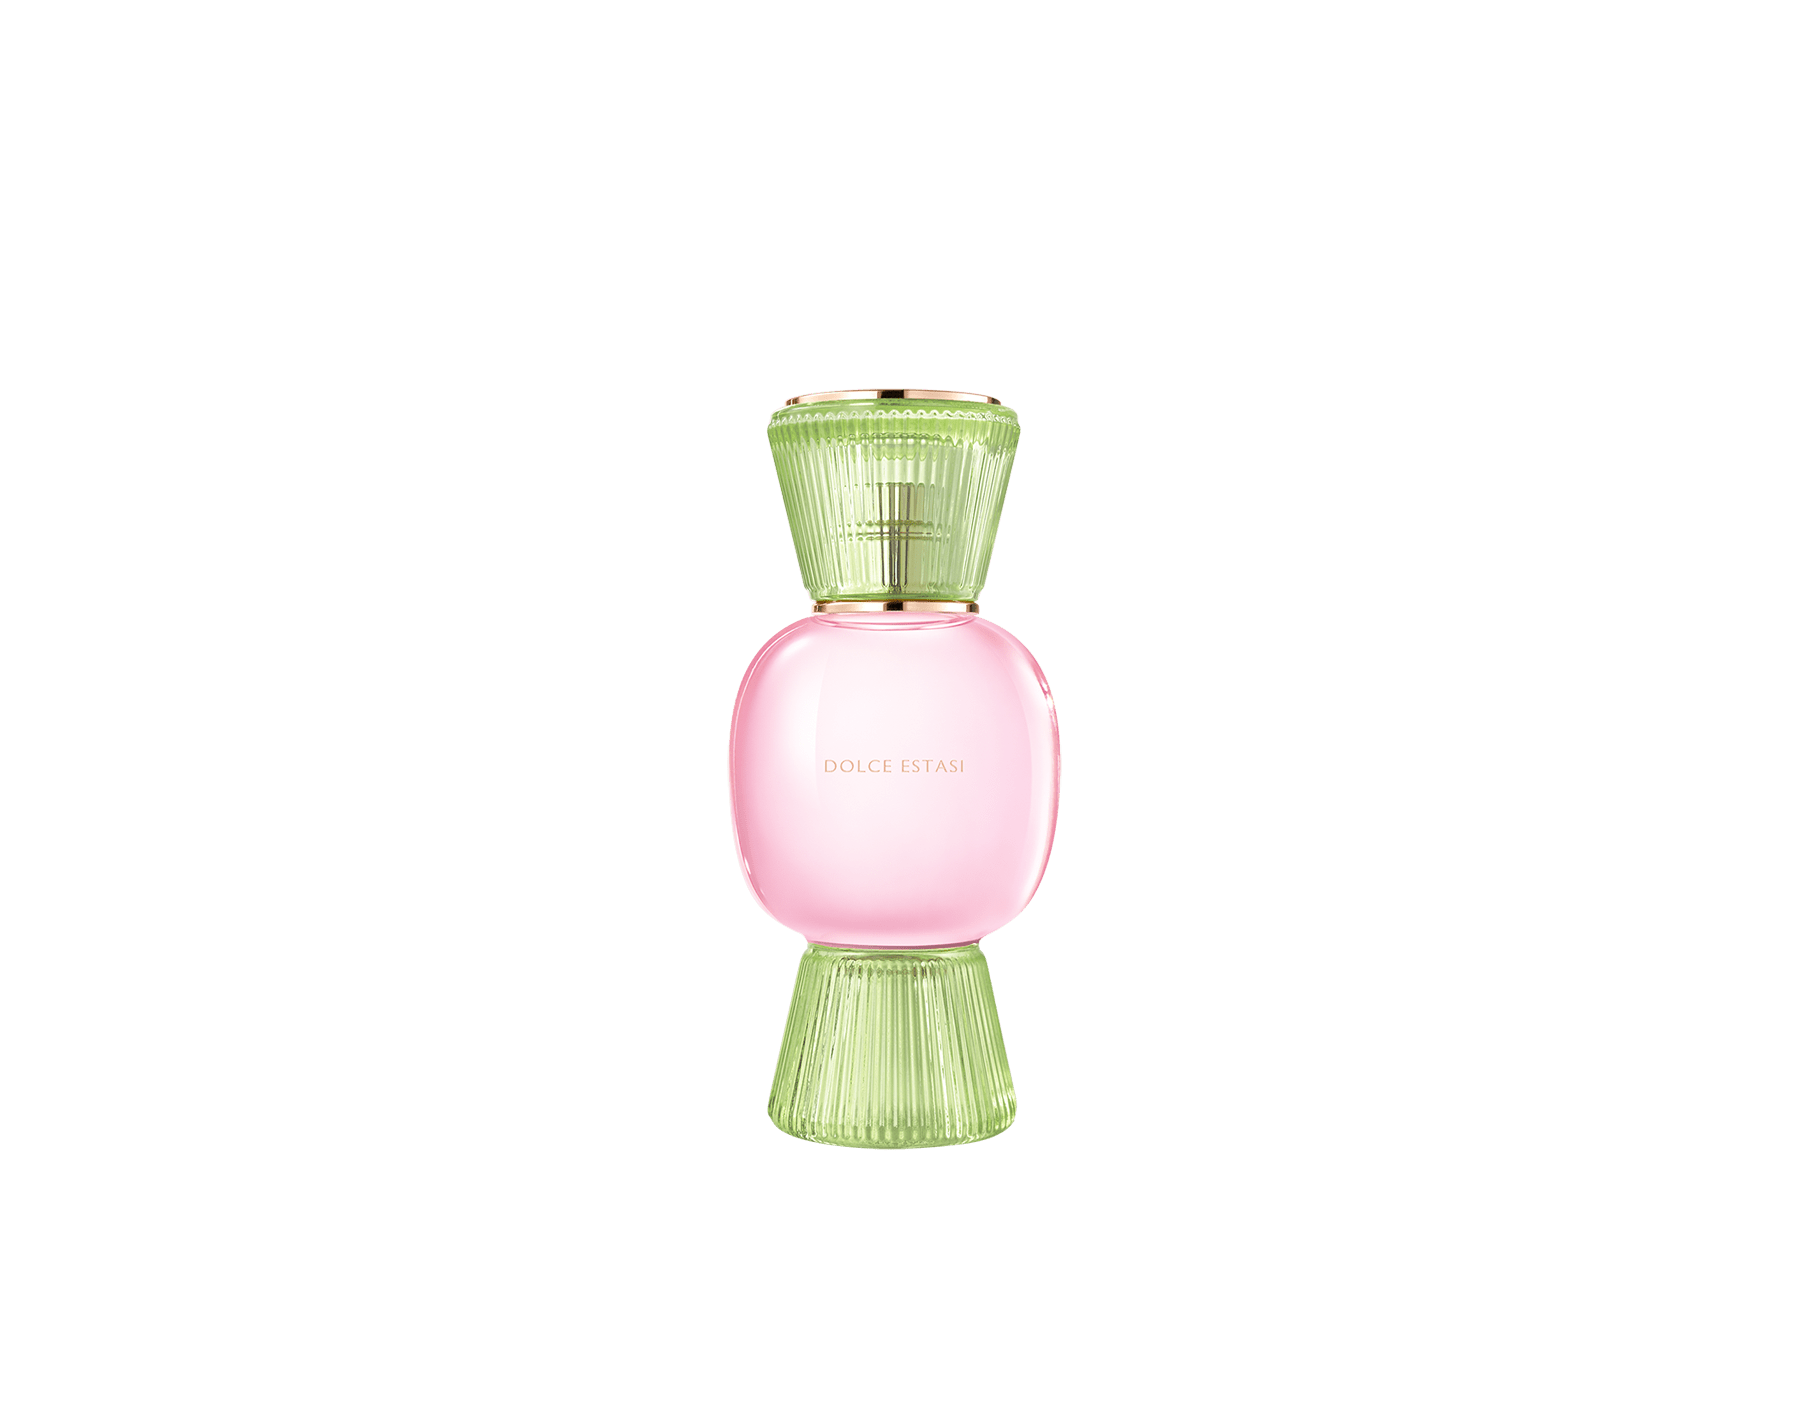 “It is the celebration of sweetness, of the Italian family cocoon.” Jacques Cavallier A soothing powdery floral, reminiscent of sweet memories of Italian pastries 41250 image 1